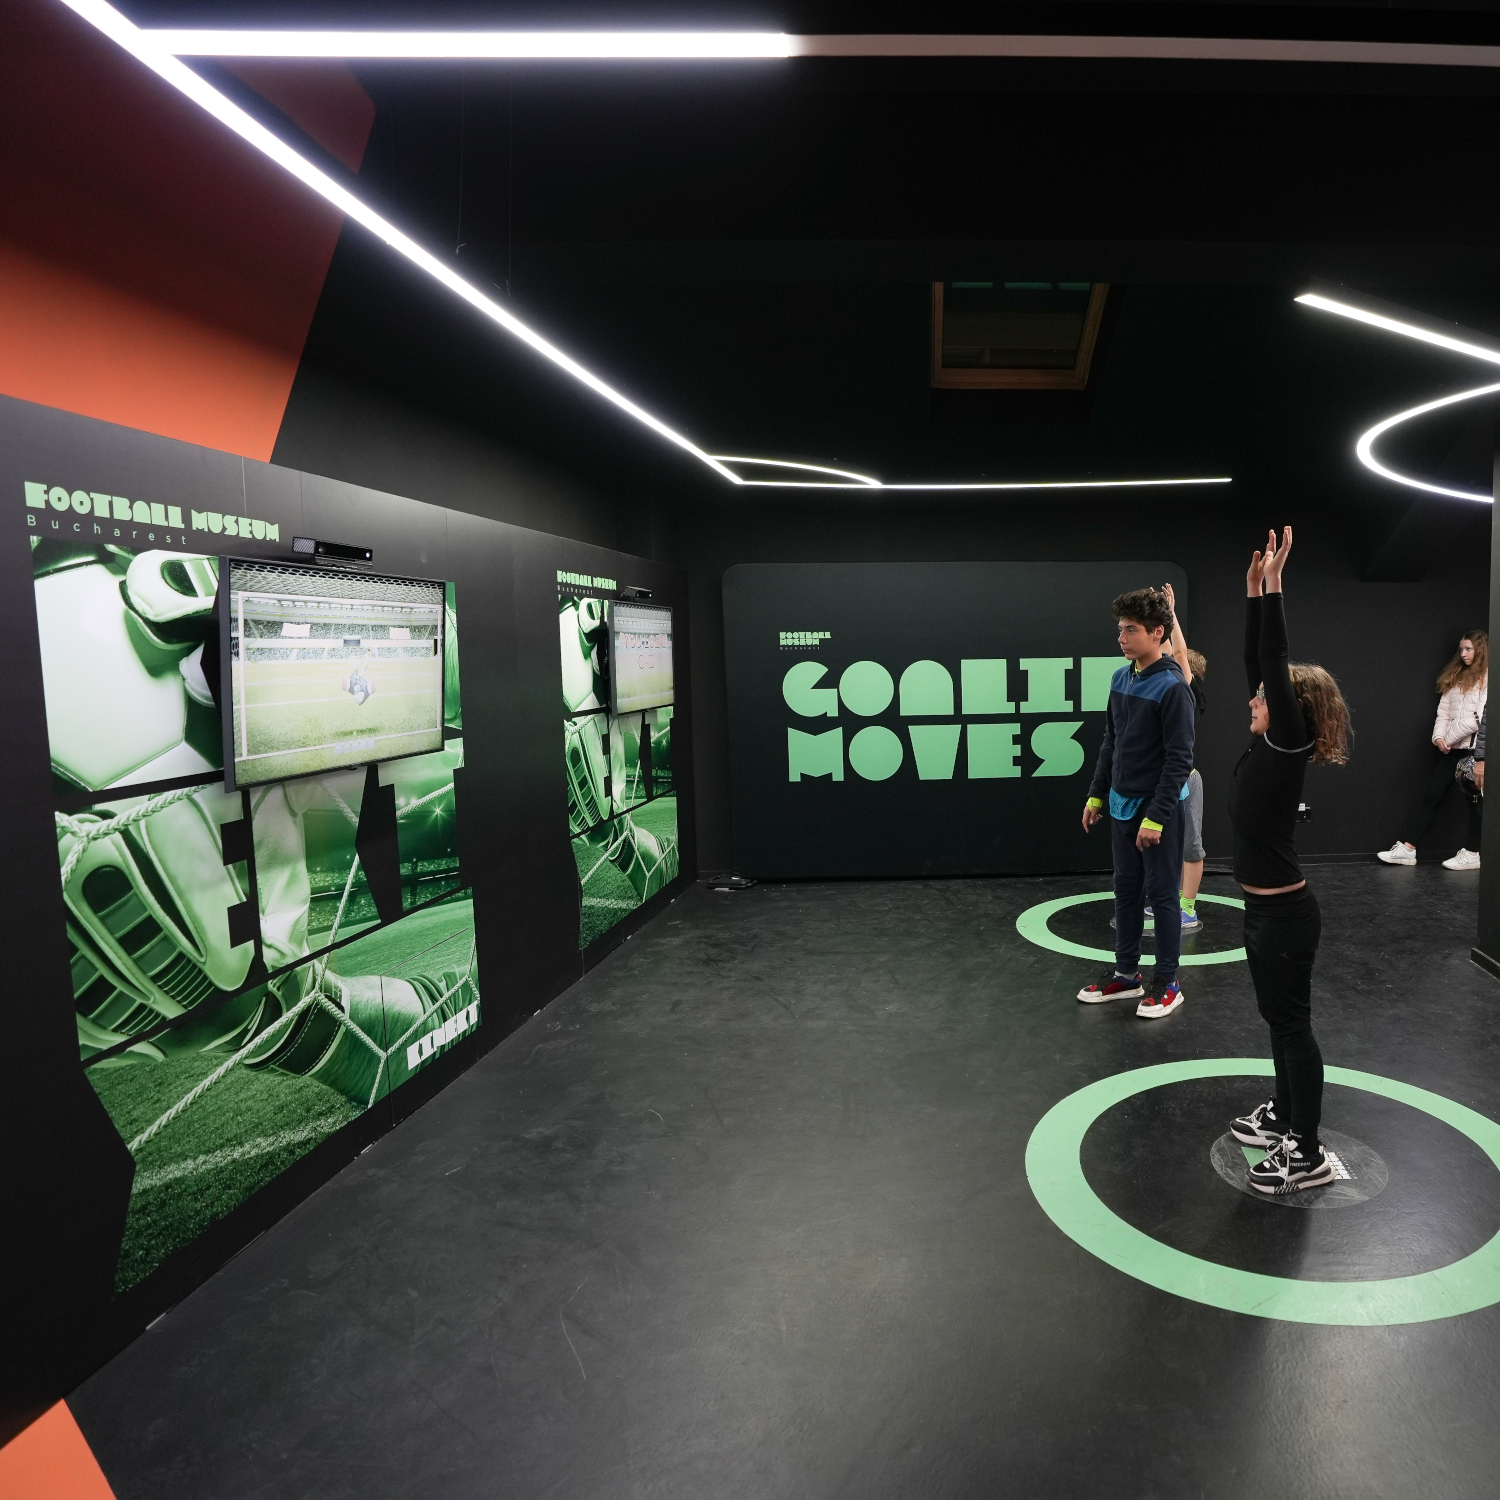 The Practice Room at the Football Museum Bucharest